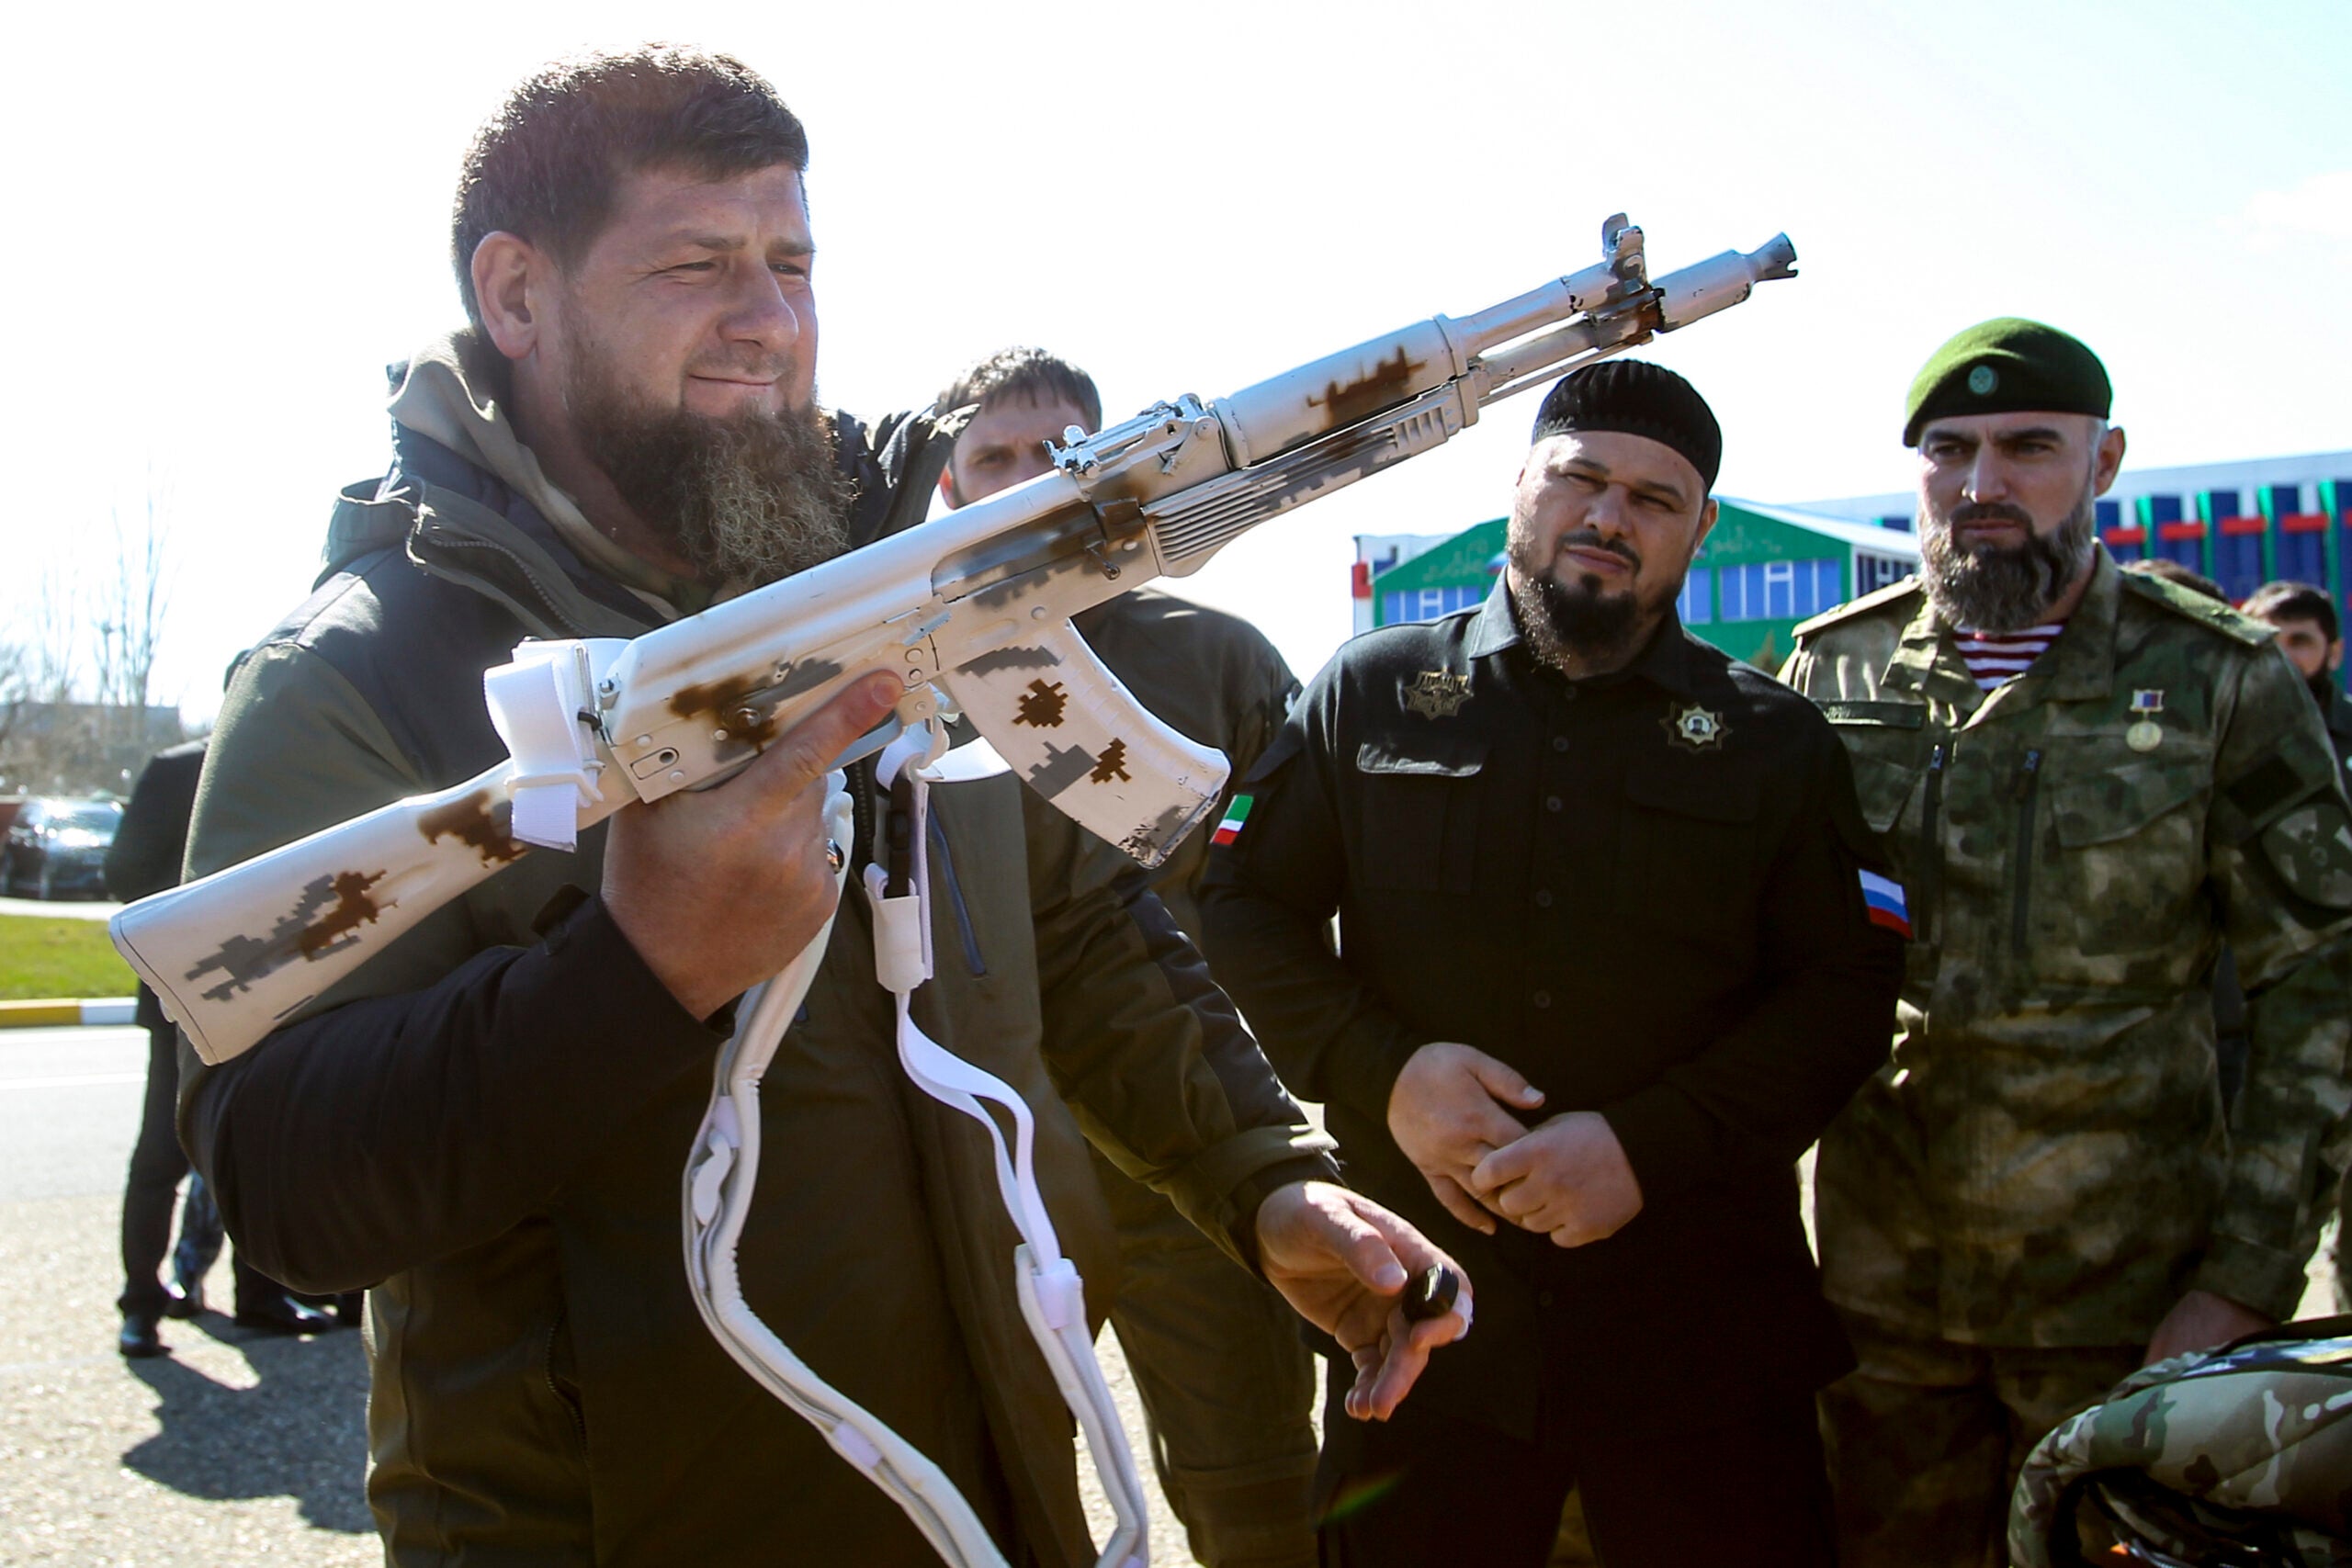 Chechnya's regional leader Ramzan Kadyrov holds a white painted Kalashnikov machine gun as he inspects troops before their deployment for an exercise in the Arctic at an airport outside Grozny, Russia, Tuesday, March 9, 2021. (AP Photo/Musa Sadulayev)